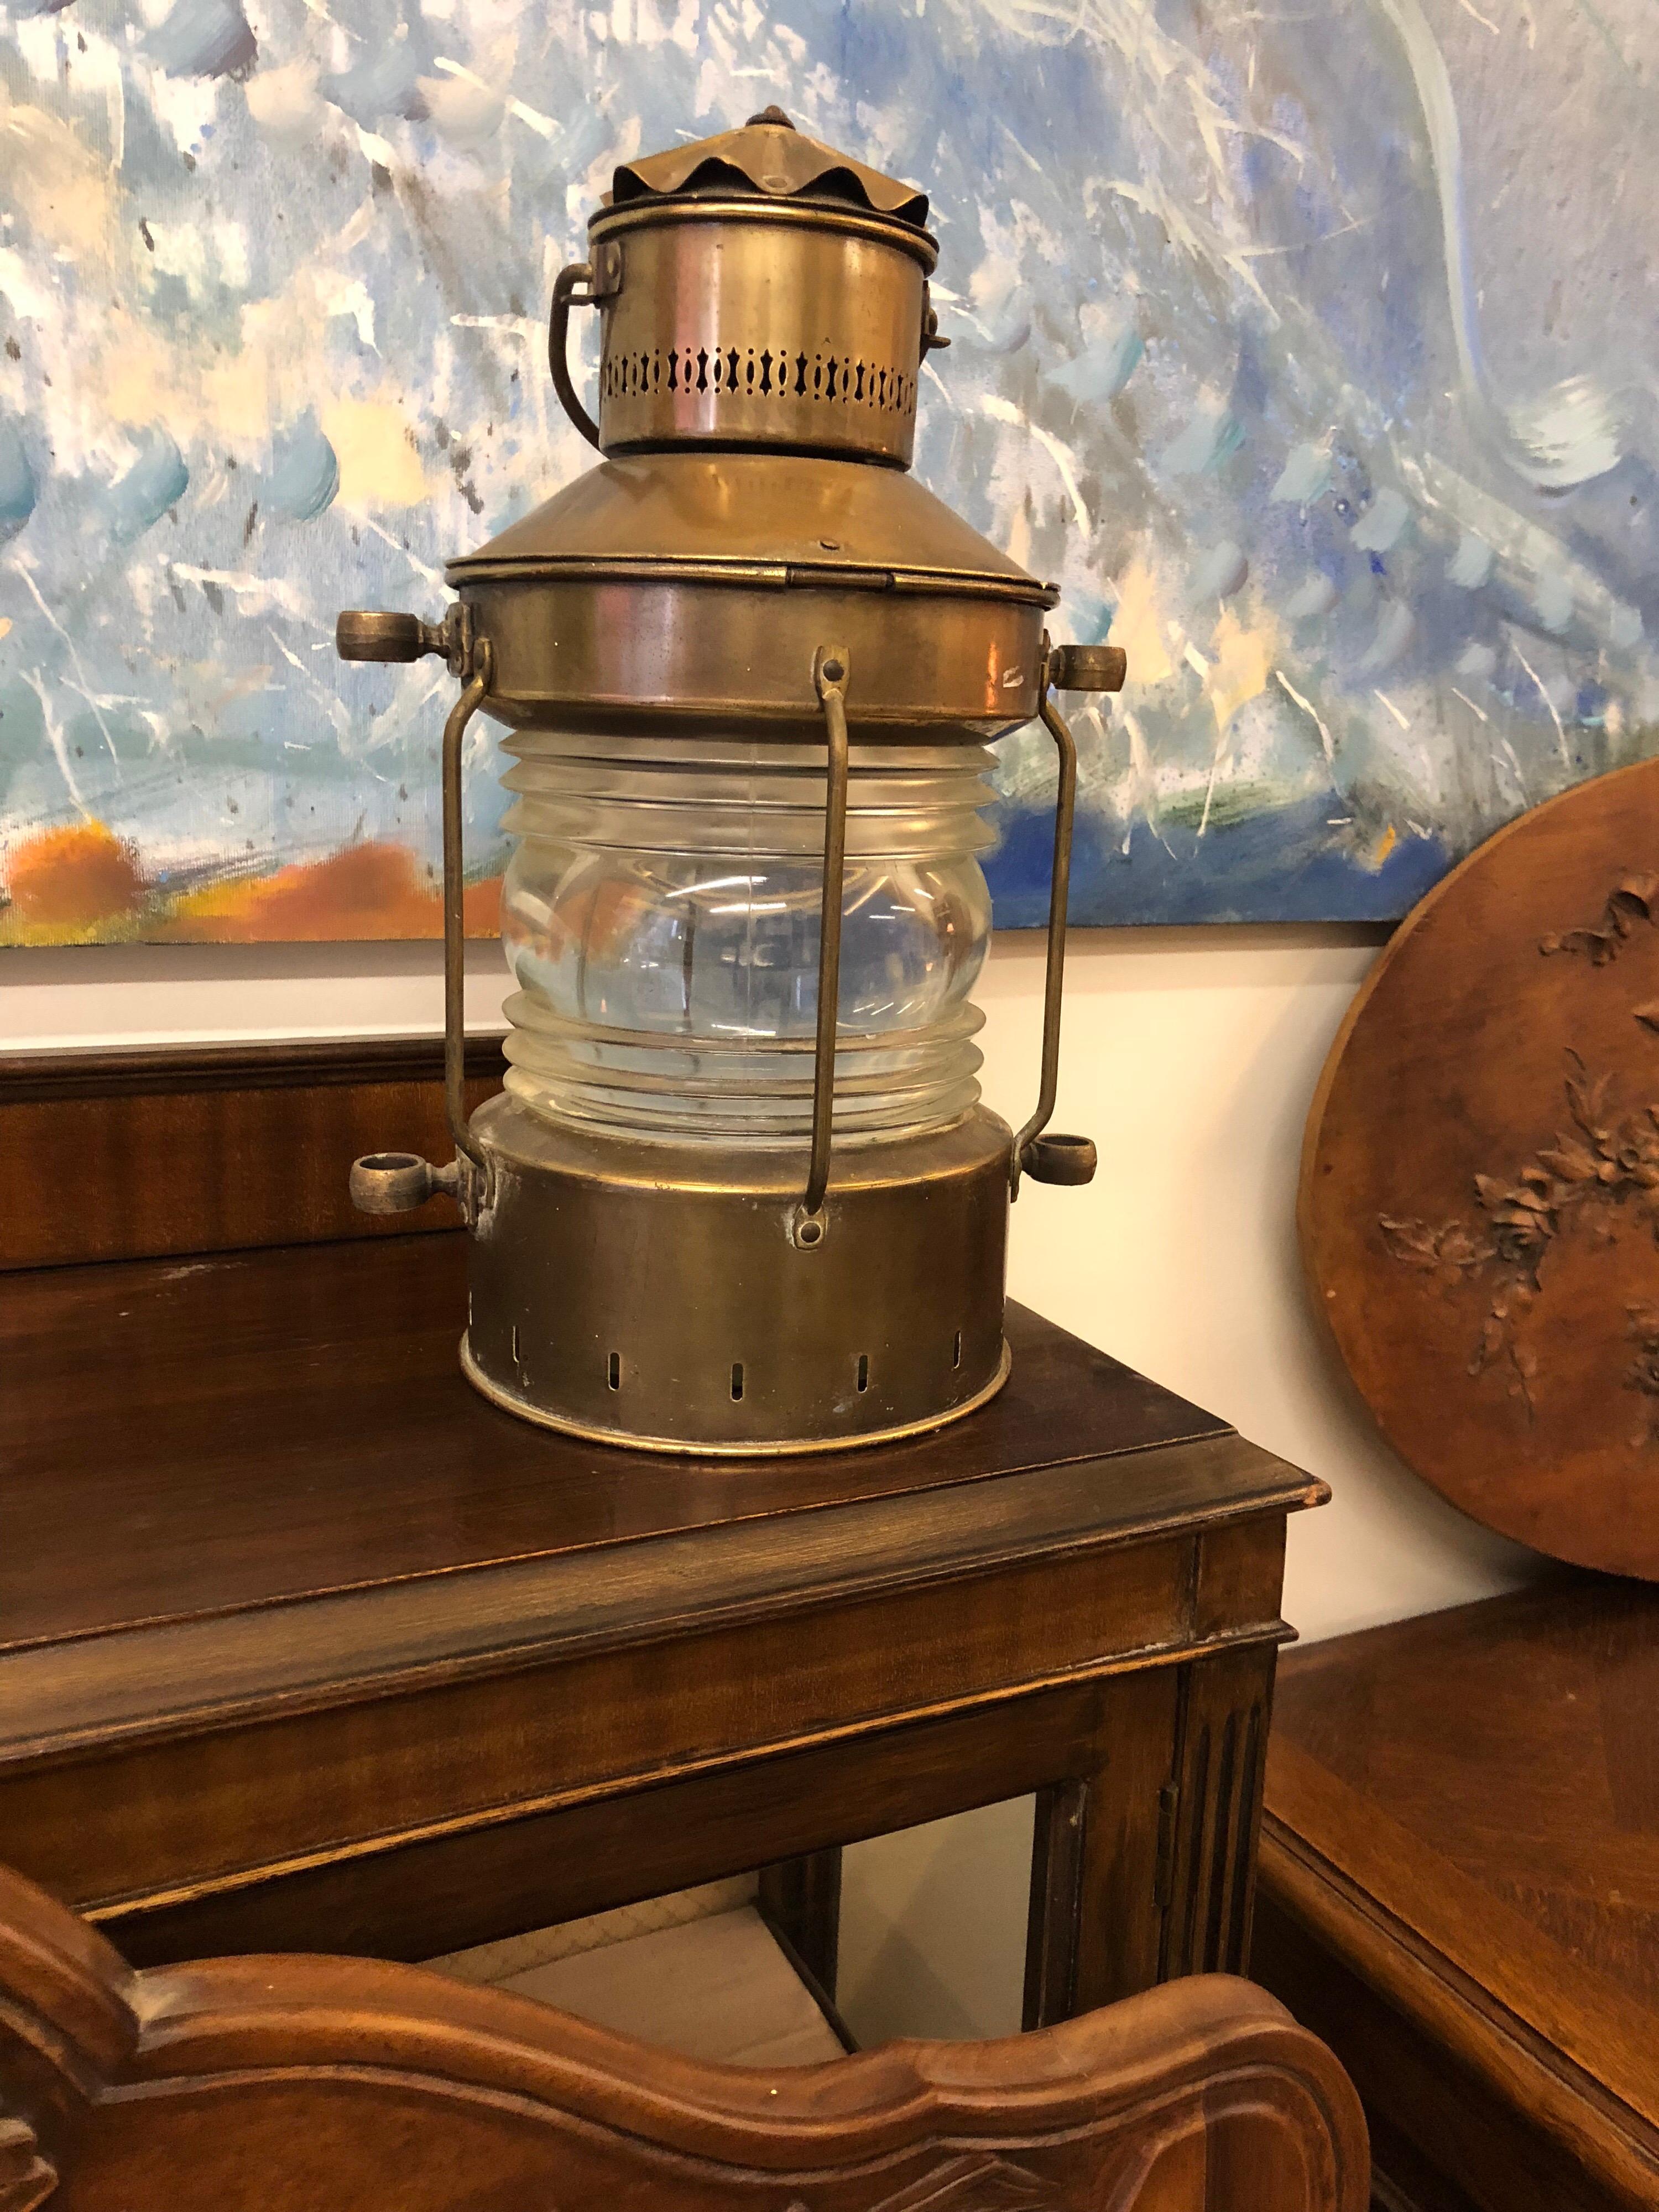 Beautiful Vintage Brass Lantern - ANKERLICHT.
Vintage Ankerlicht brass ships lantern from the Netherlands re-purposed into an electric lamp. Features a thick, clear glass 360 degree lens. Hinged top that opens to access the interior light. 
Very